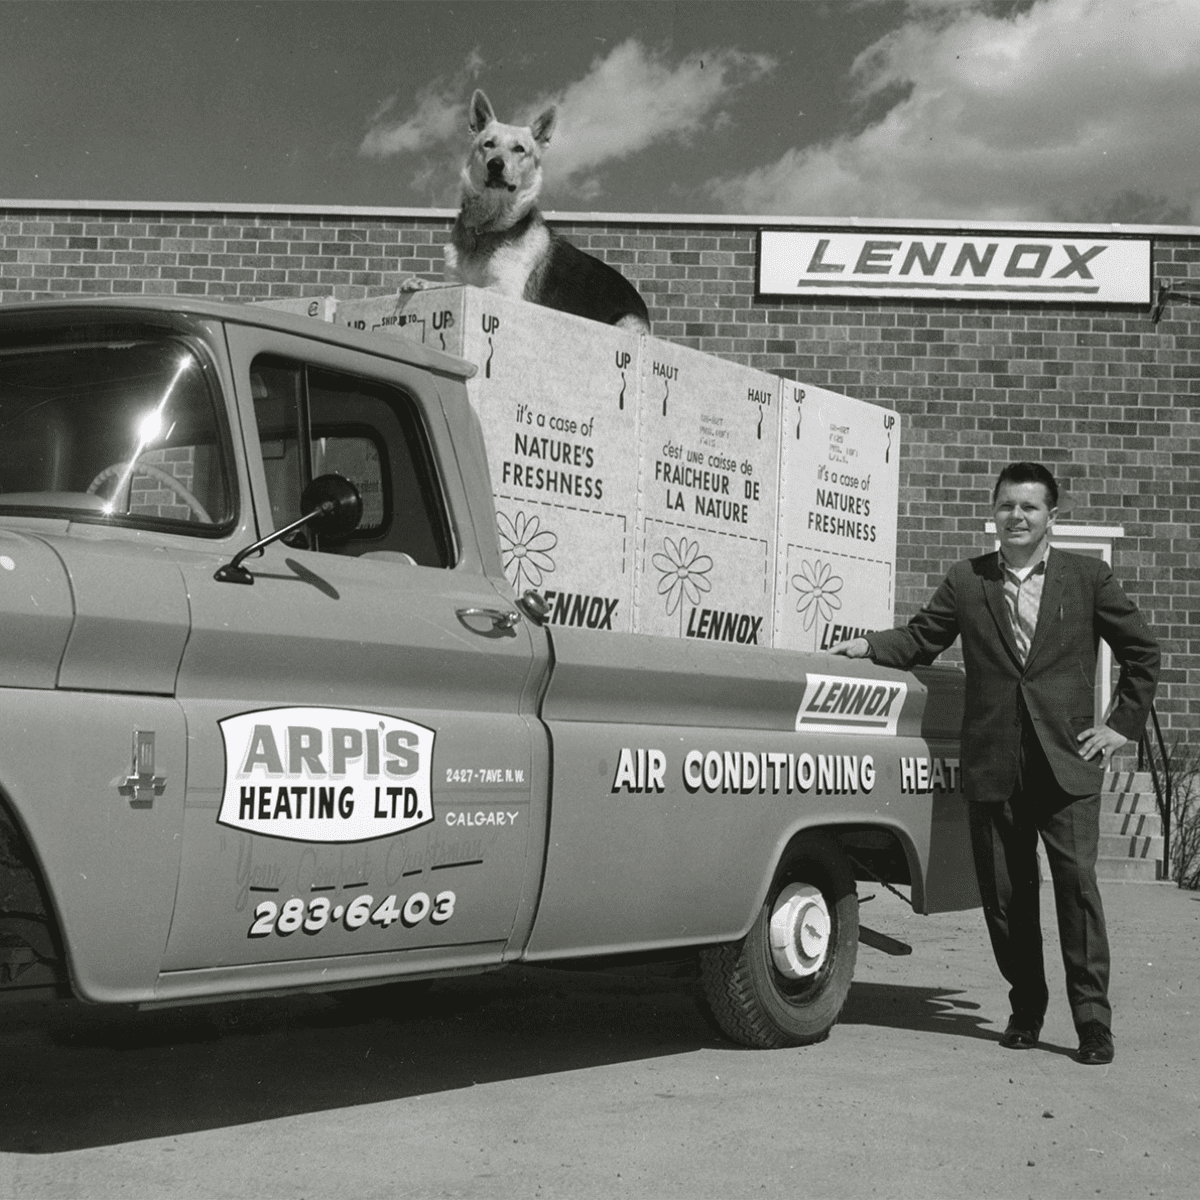 Arpi's commercial service in Calgary since 1963